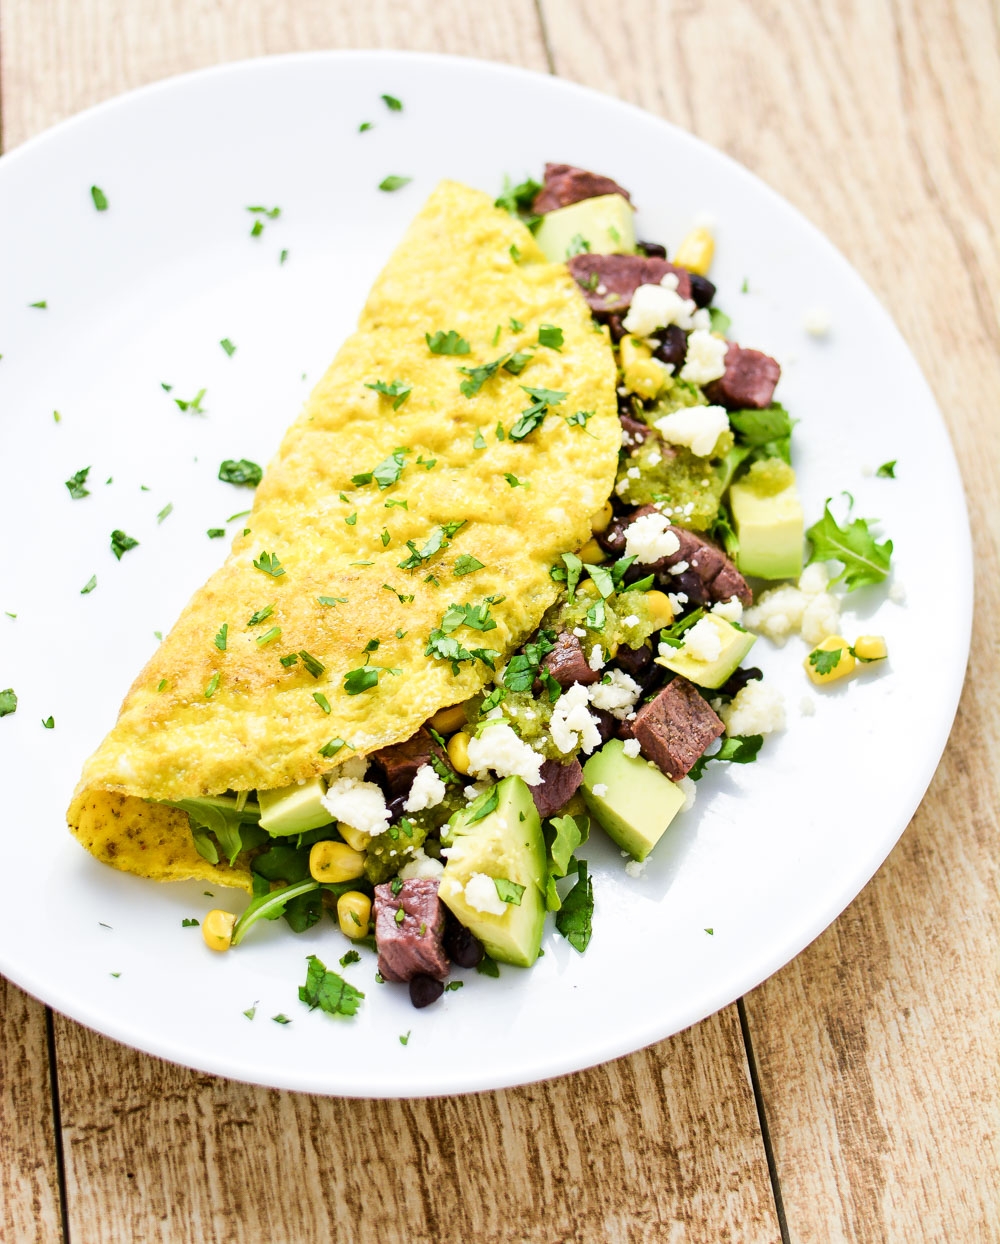 Southwestern Omelet with Quick Salsa Verde is a quick and delicious breakfast or dinner recipe!